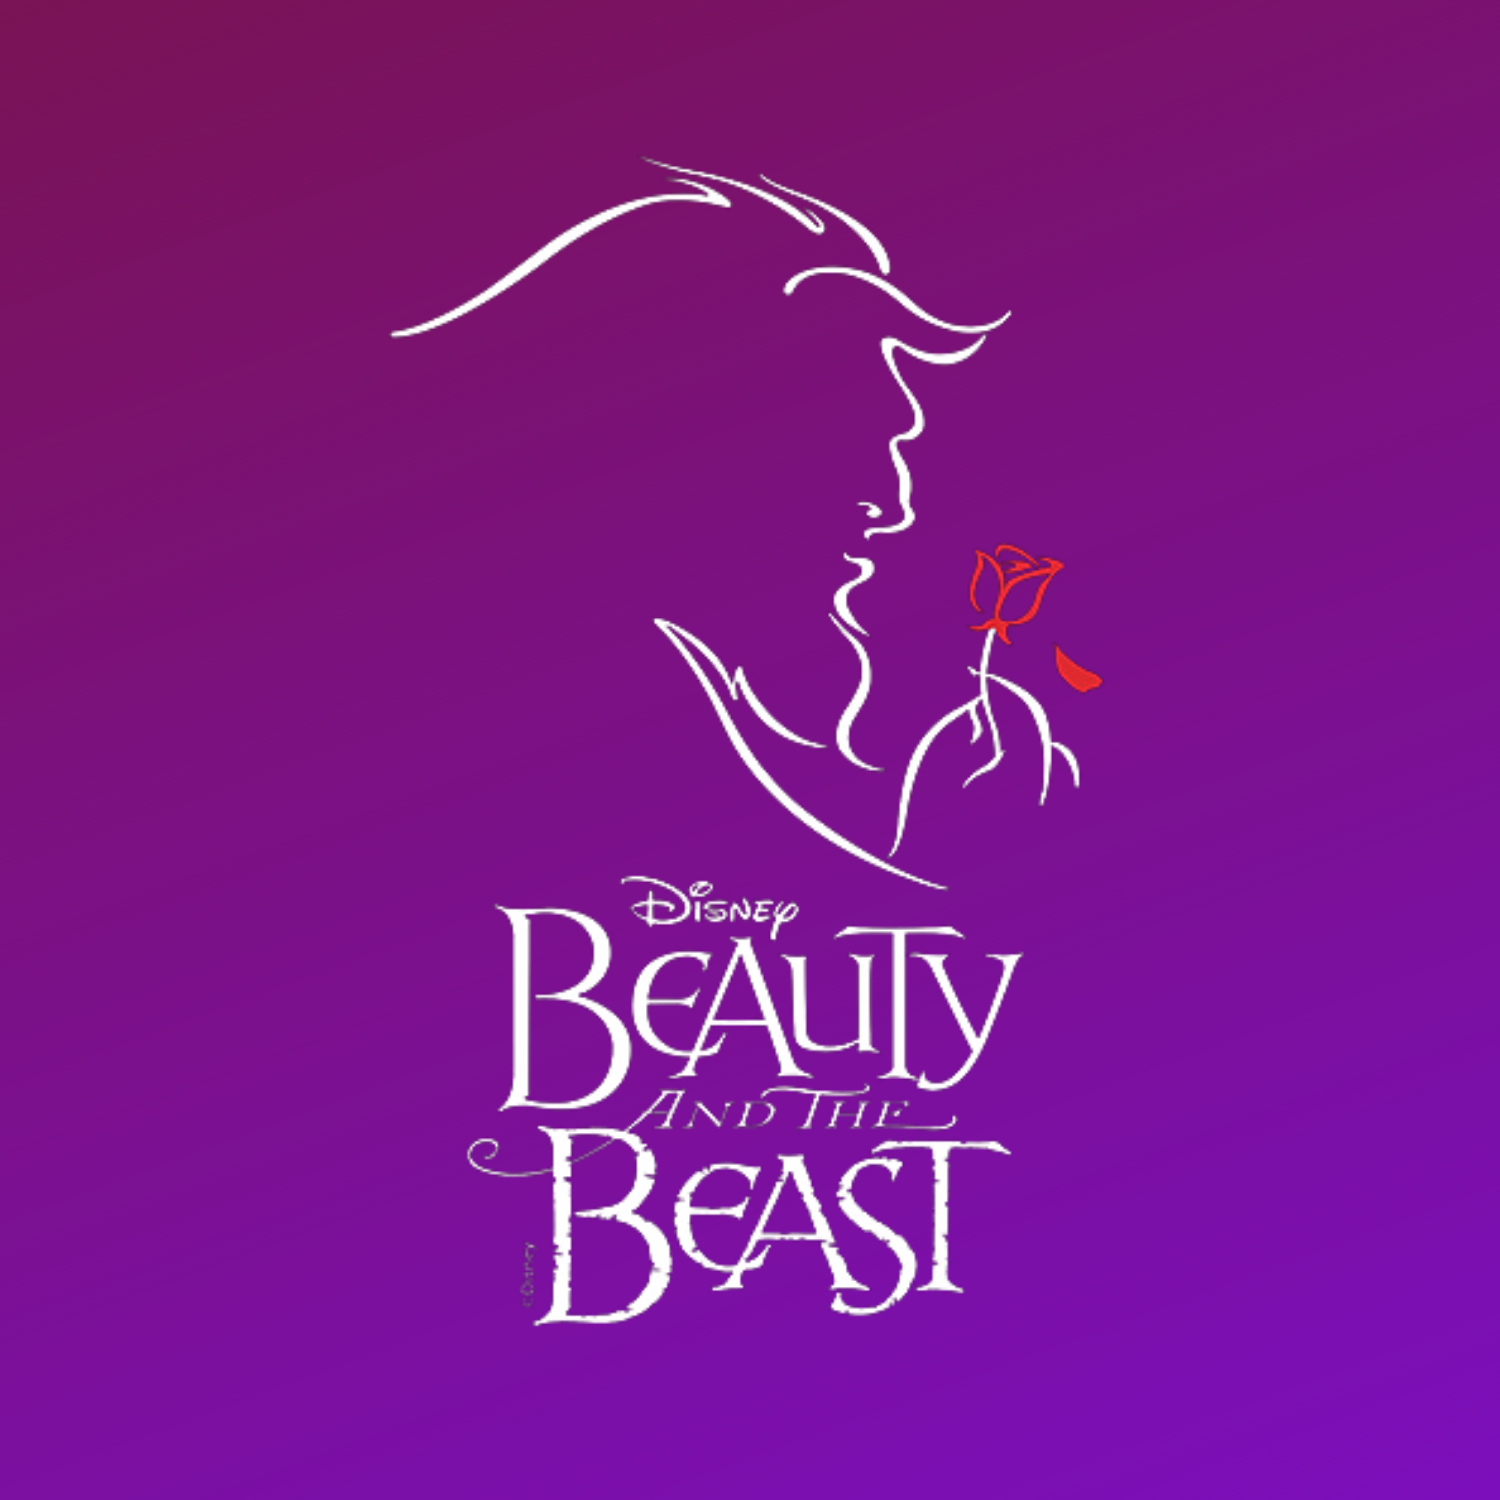 Disney's Beauty and the Beast - 2022